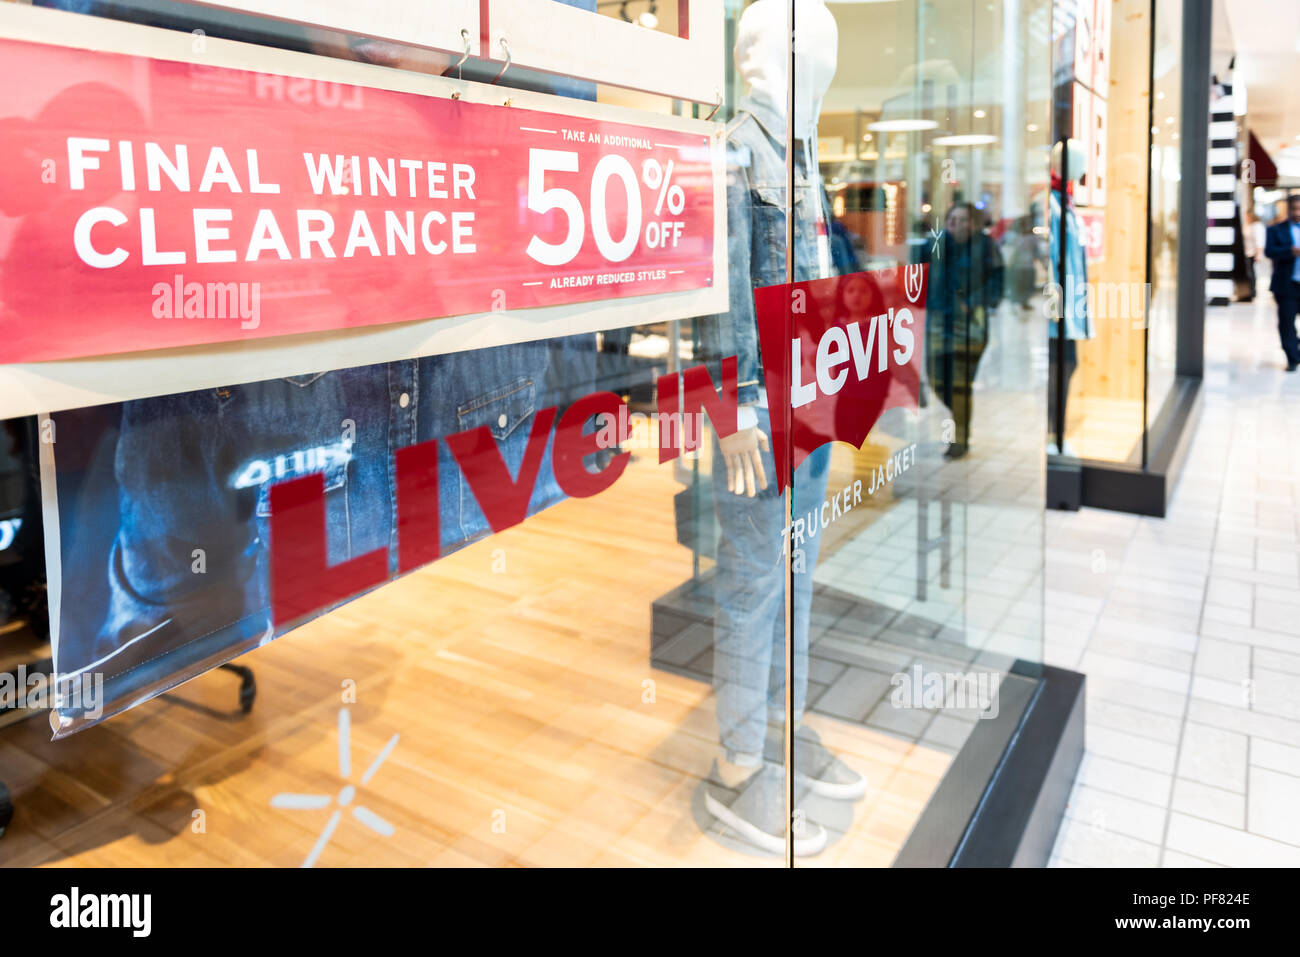 levis sale in store